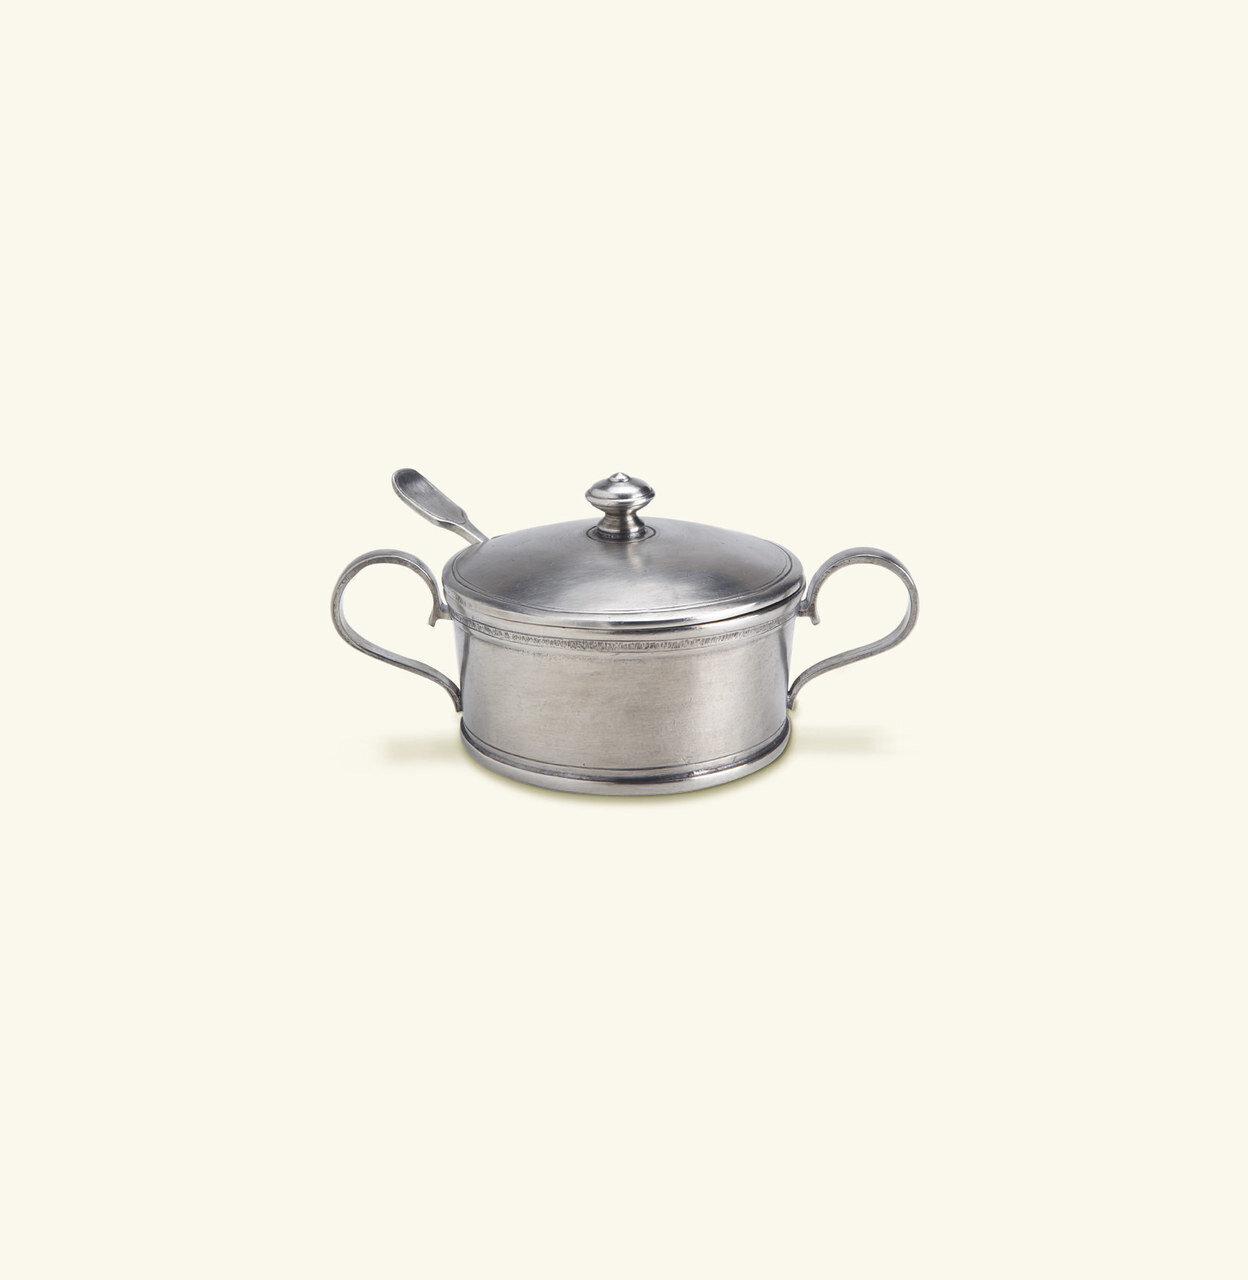 Match Pewter Sugar Bowl With Handles & Spoon a647.5